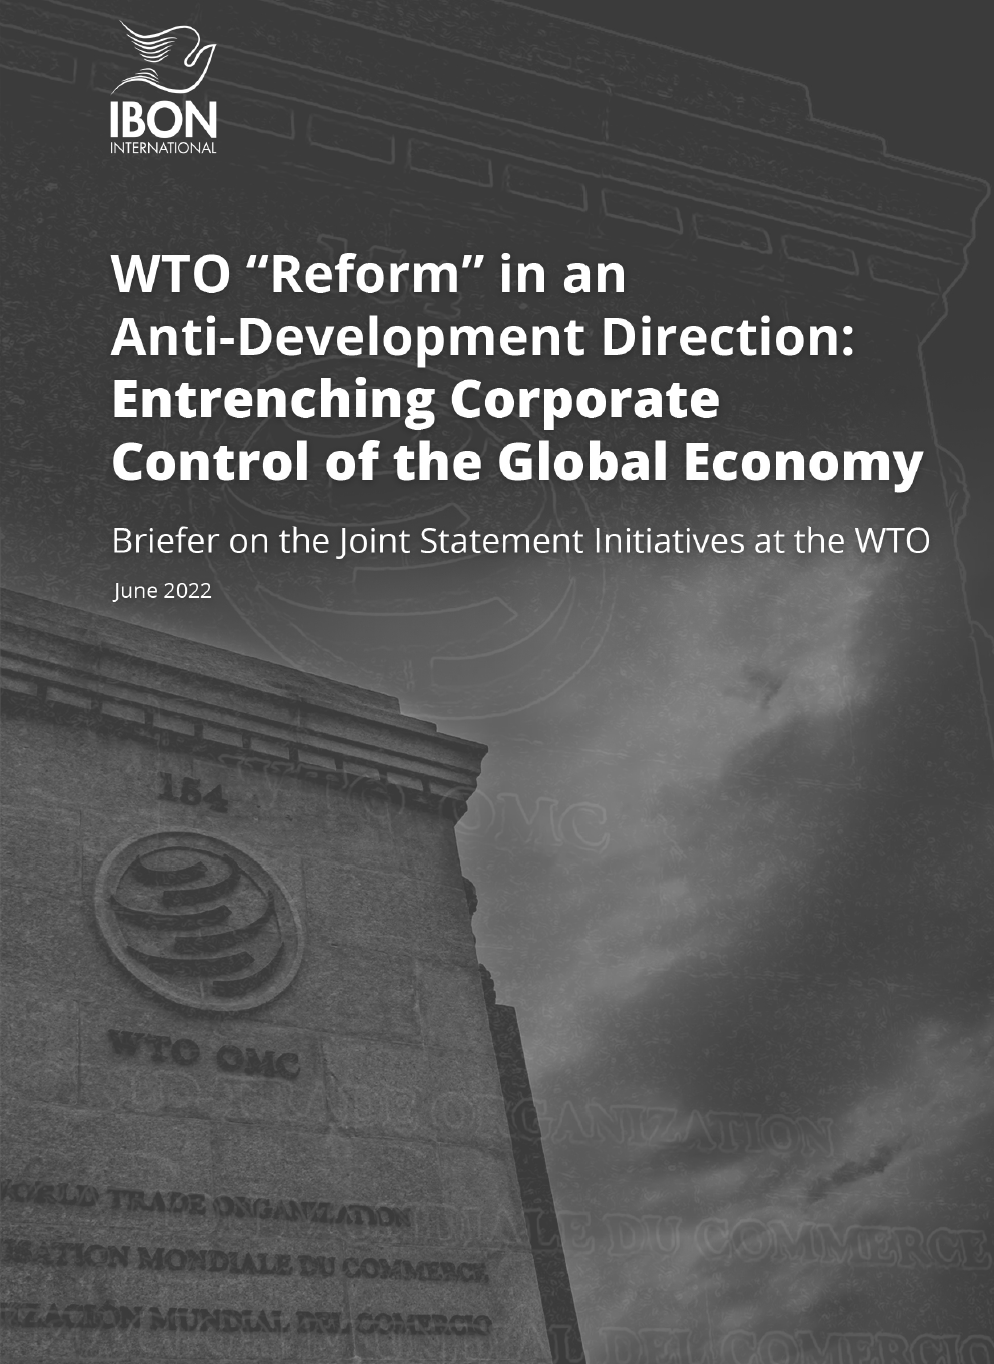 WTO “Reform” in an Anti-Development Direction: Entrenching Corporate Control of the Global Economy